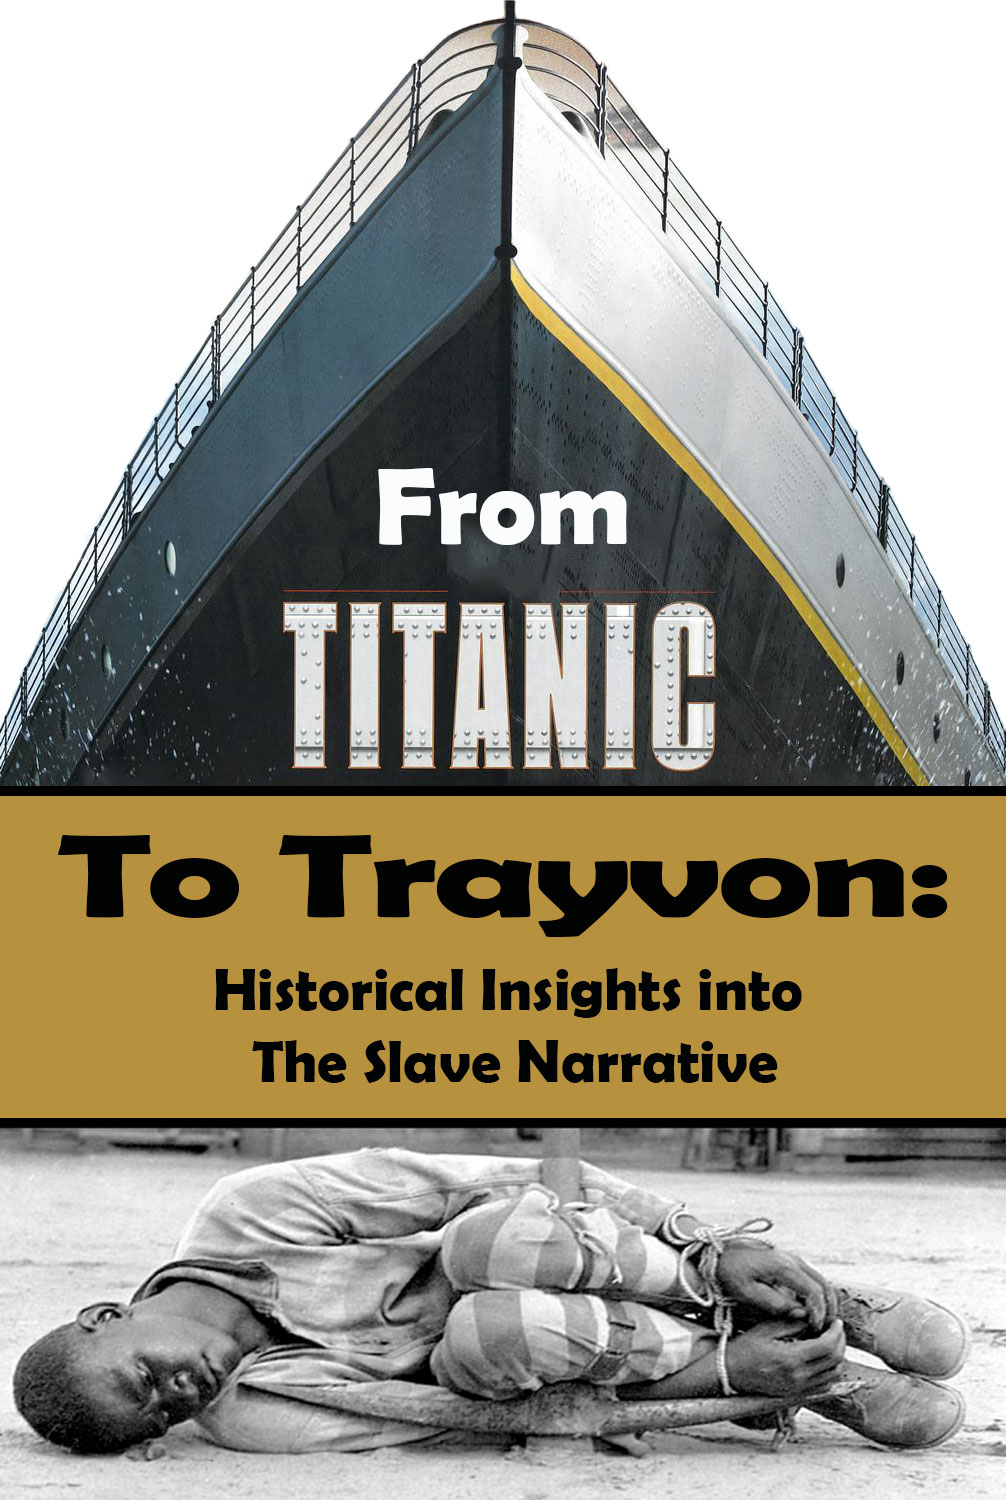 MB_0039_From Titanic To Trayvon - Book Cover.jpg